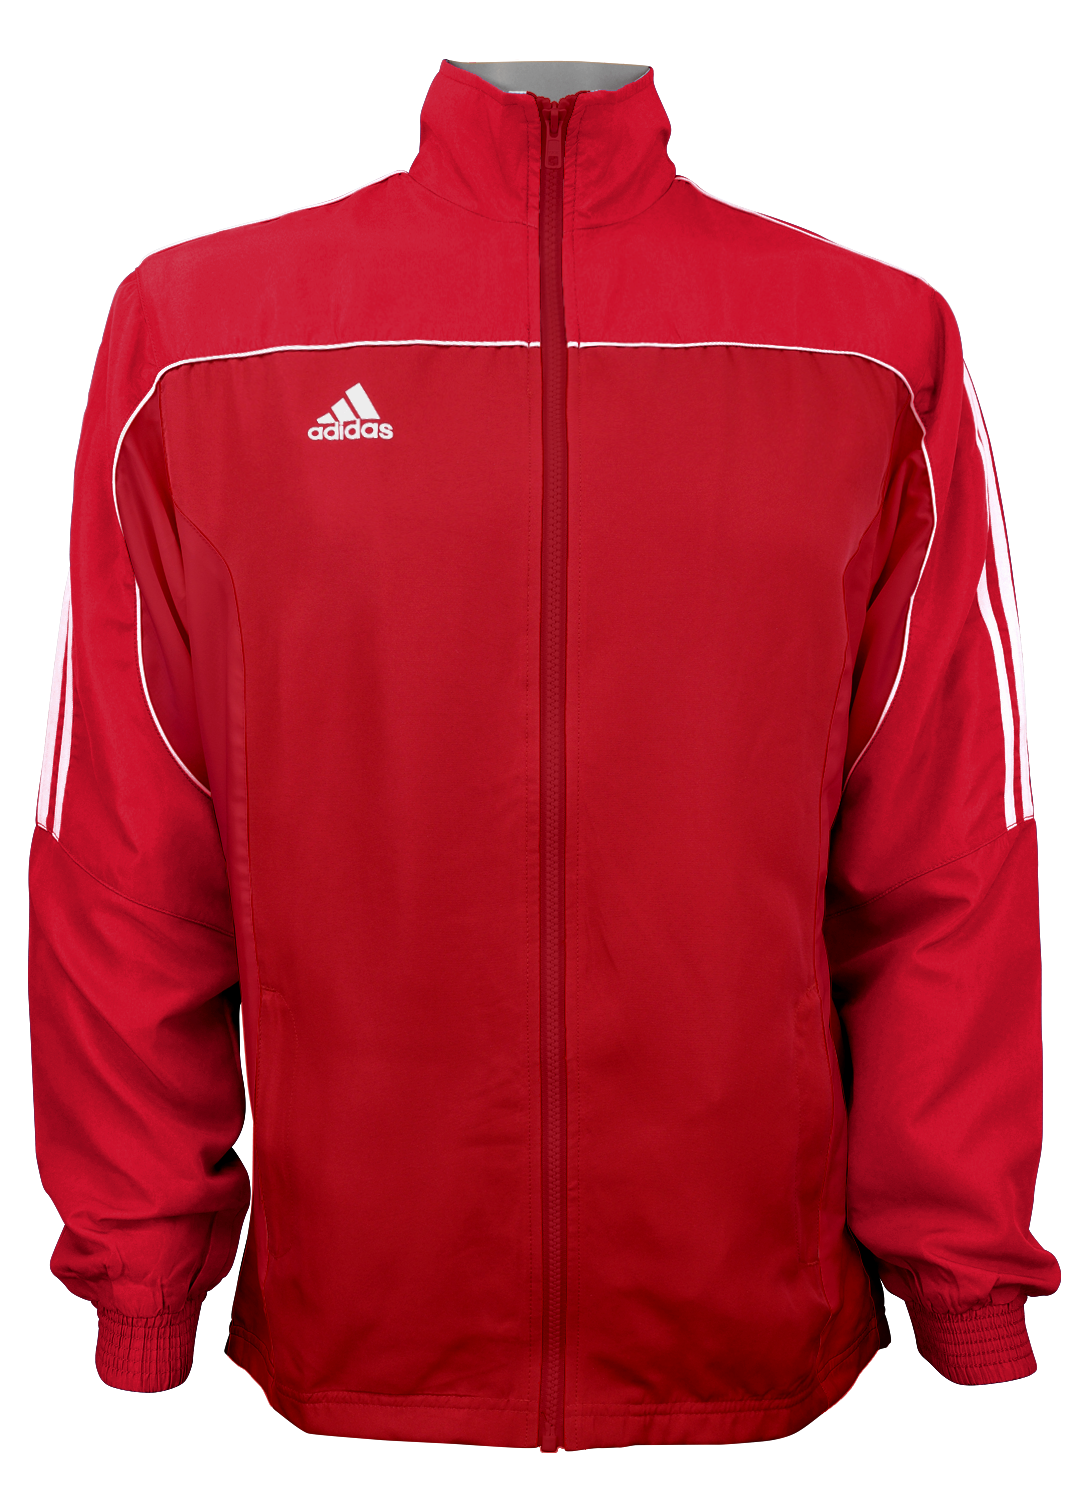 OFFICIAL USAT GRAND PRIX CENTRAL ADIDAS TEAM JACKET-RED